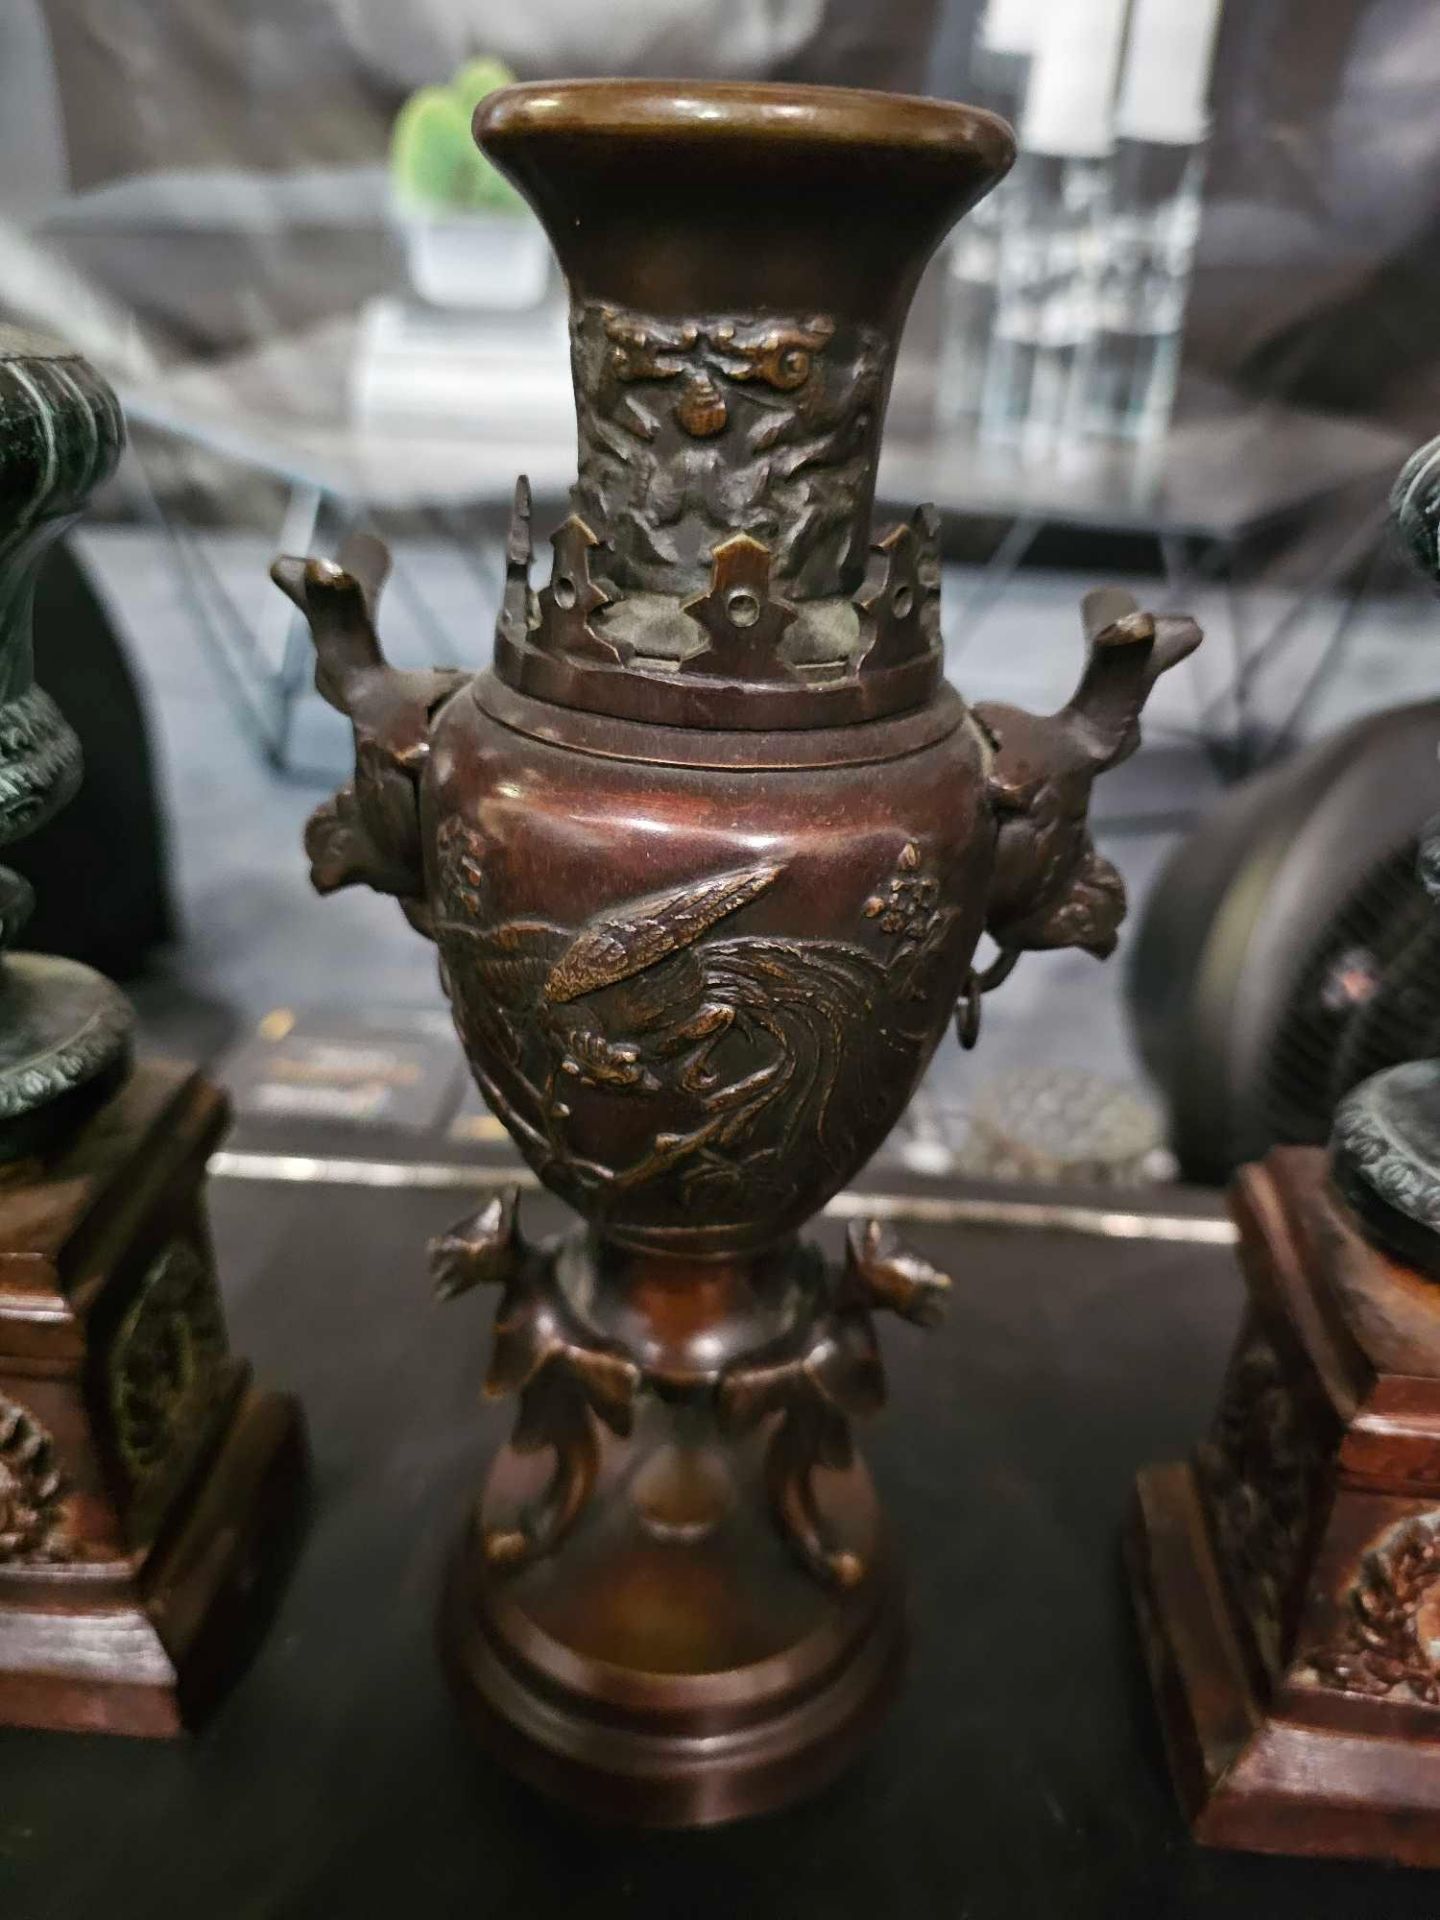 A Pair Of Decorative Empire Style Columns And A Bronzed Incense Vase - Image 2 of 4